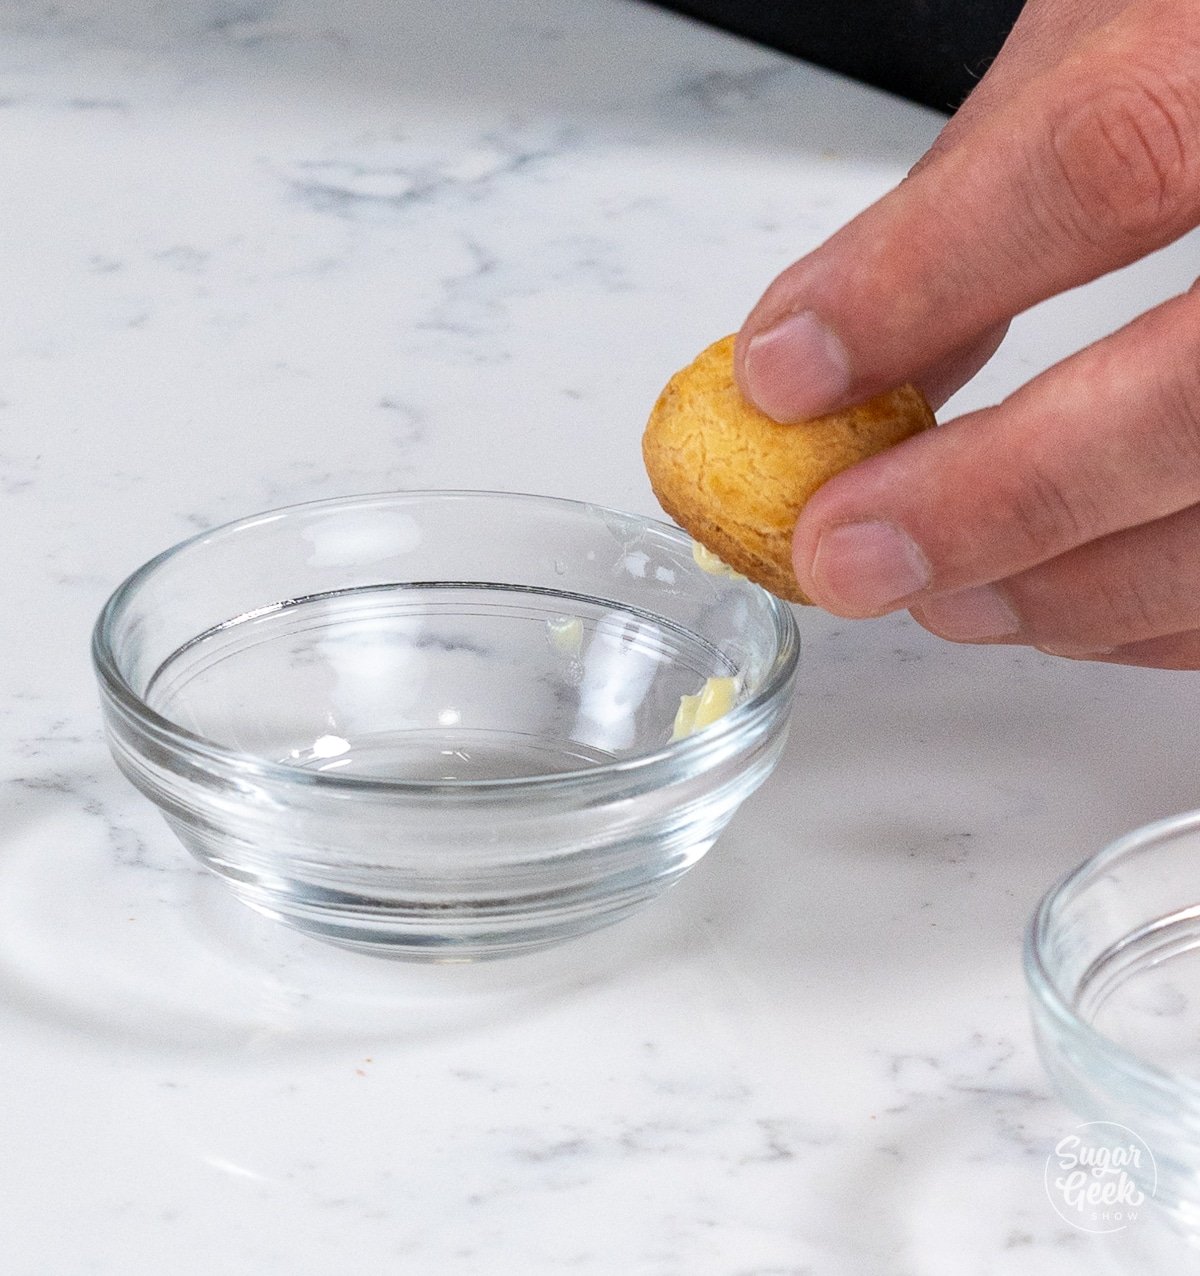 hand scraping a cream puff against the side of a small bowl to remove excess filling.